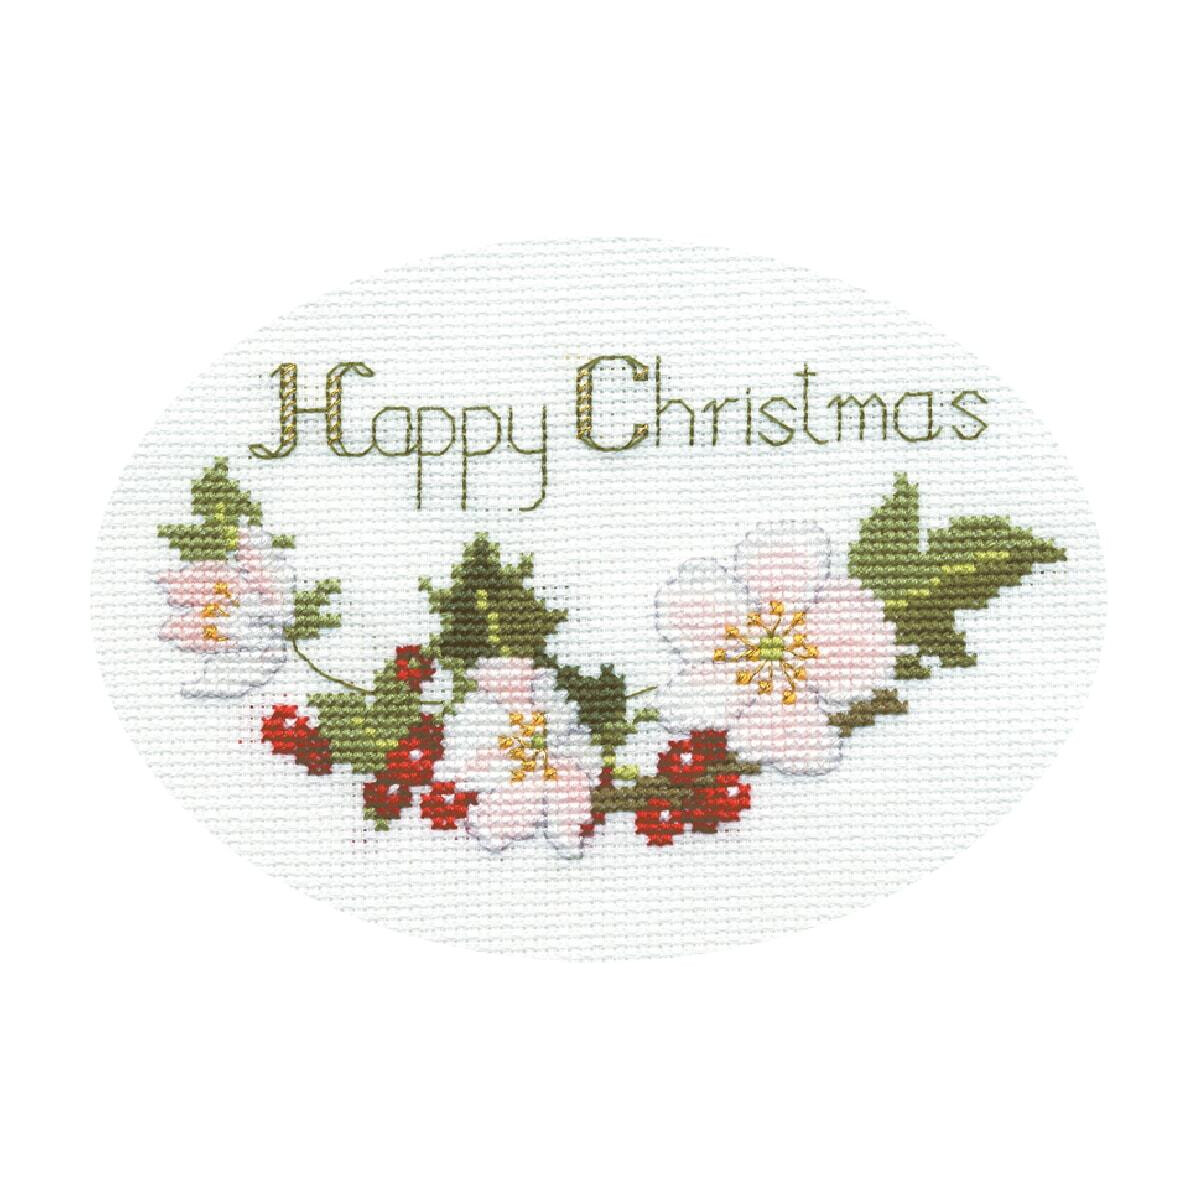 An embroidered oval design with the text Merry Christmas...